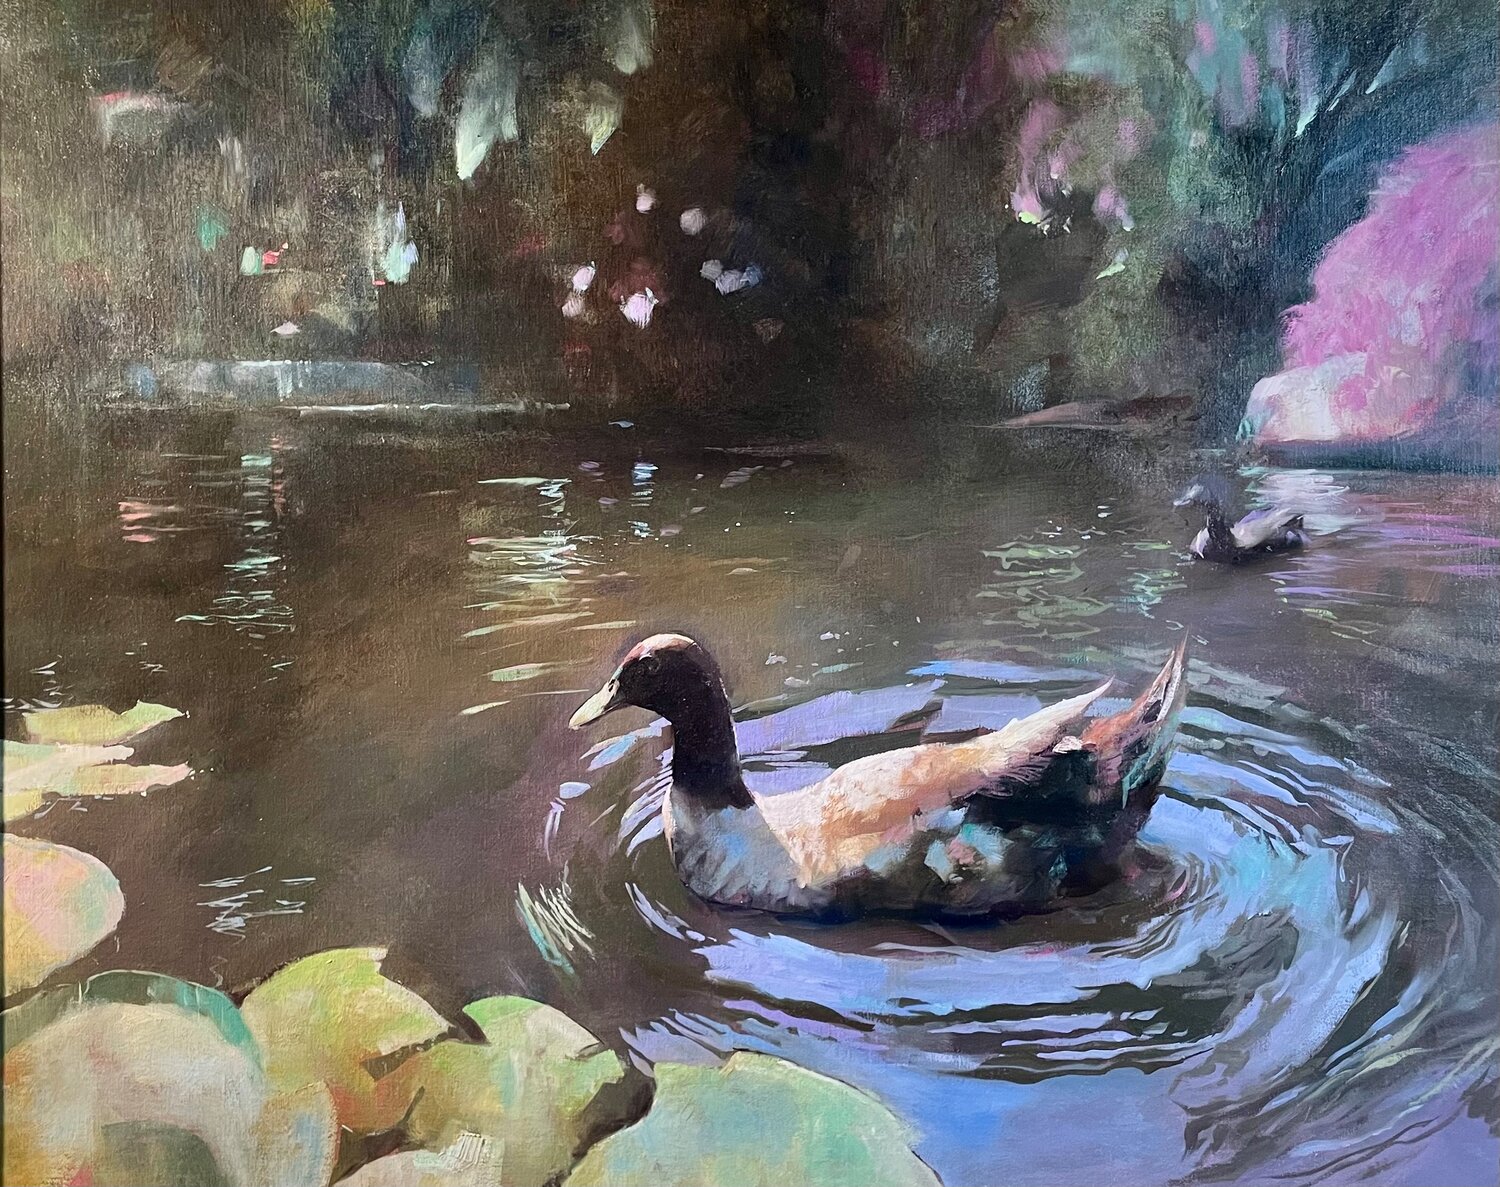 “Duck Pond” is an oil painting by Evan Harrington.